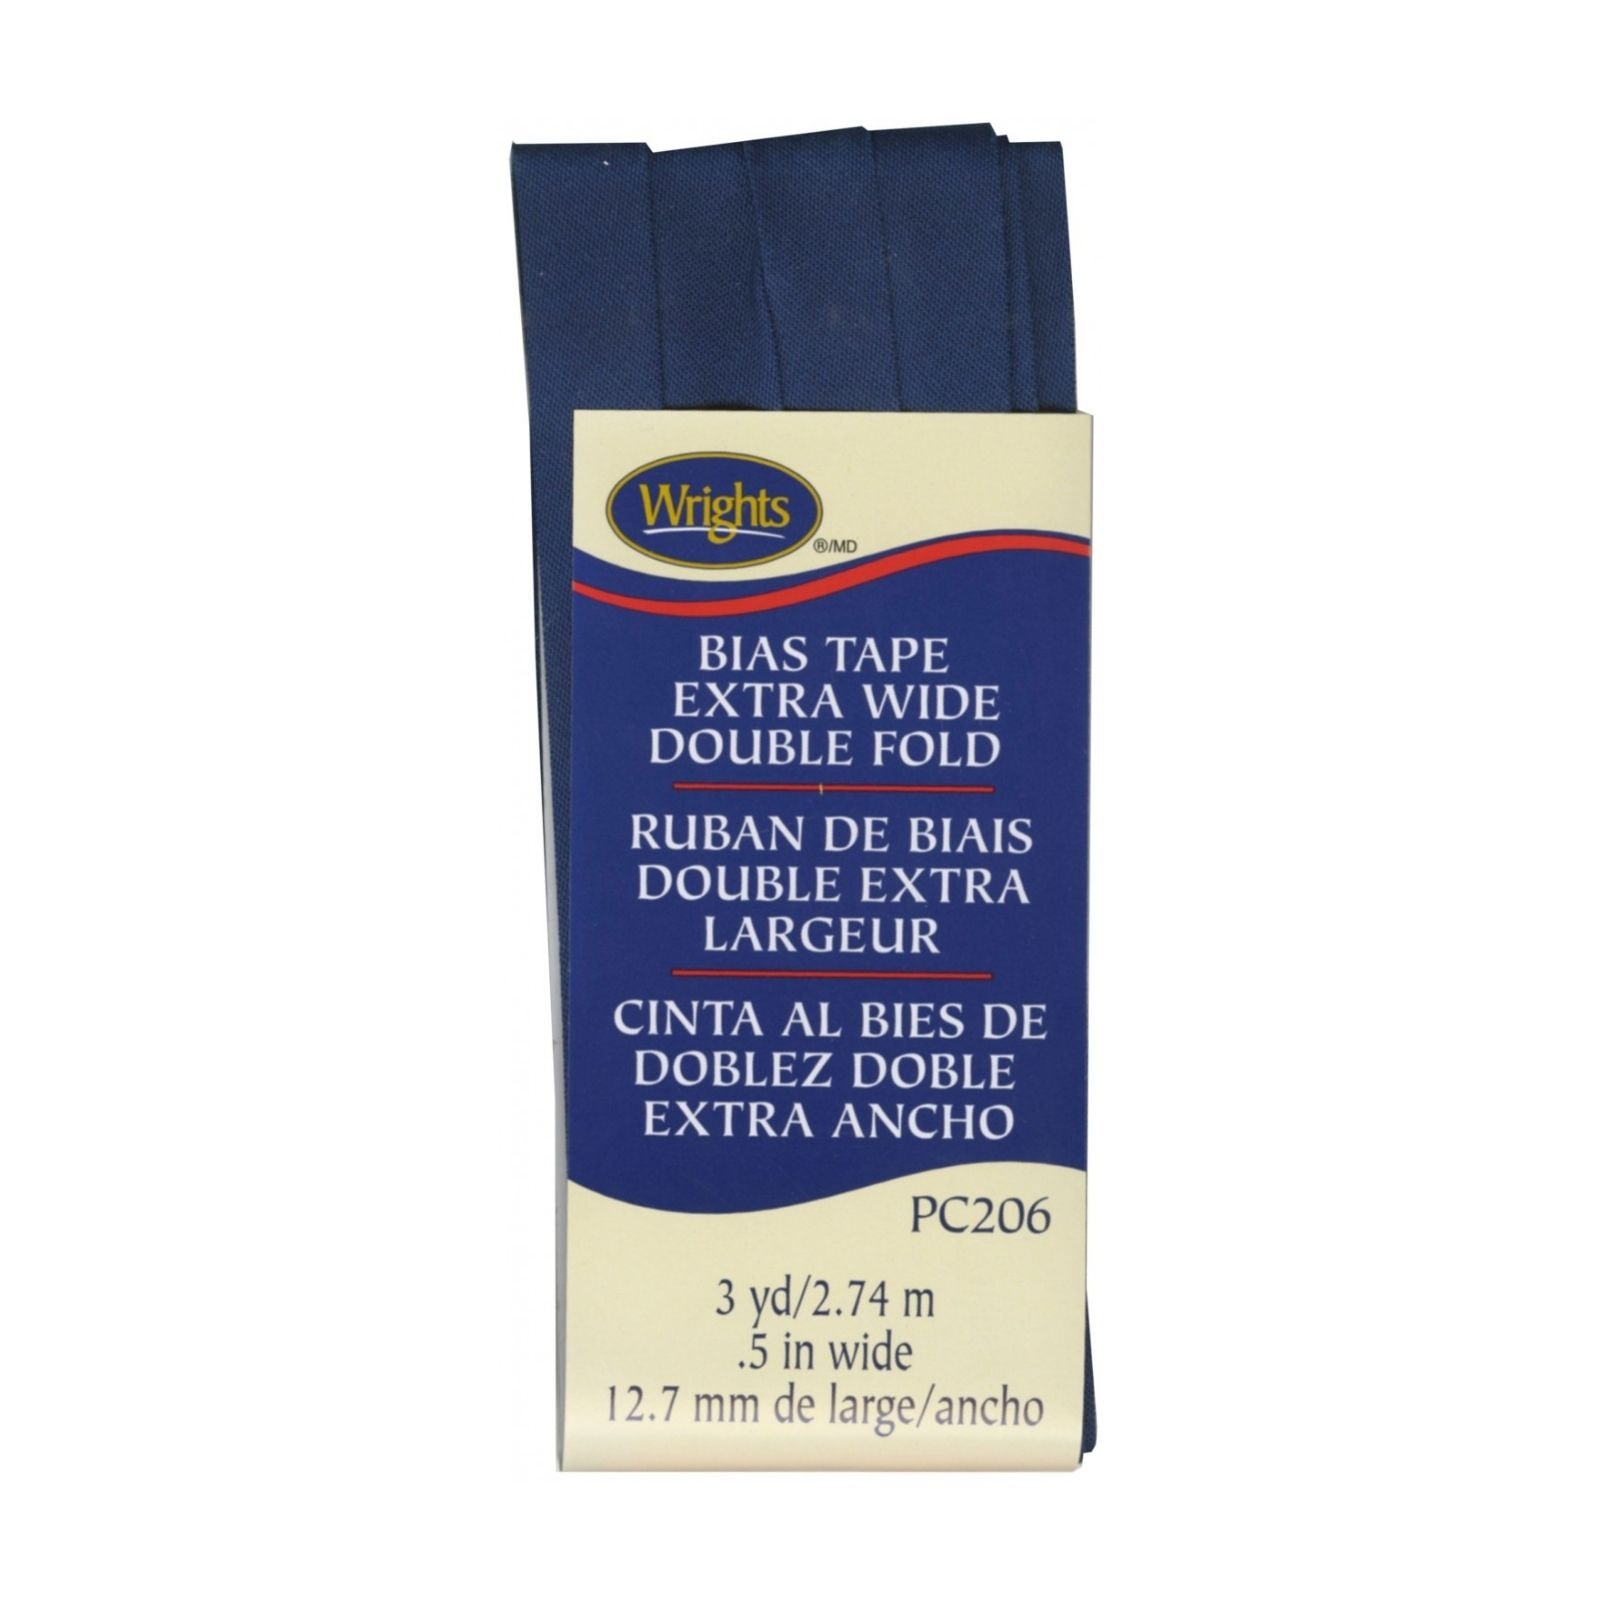 Wrights Extra Wide Double Fold Bias Tape - Navy